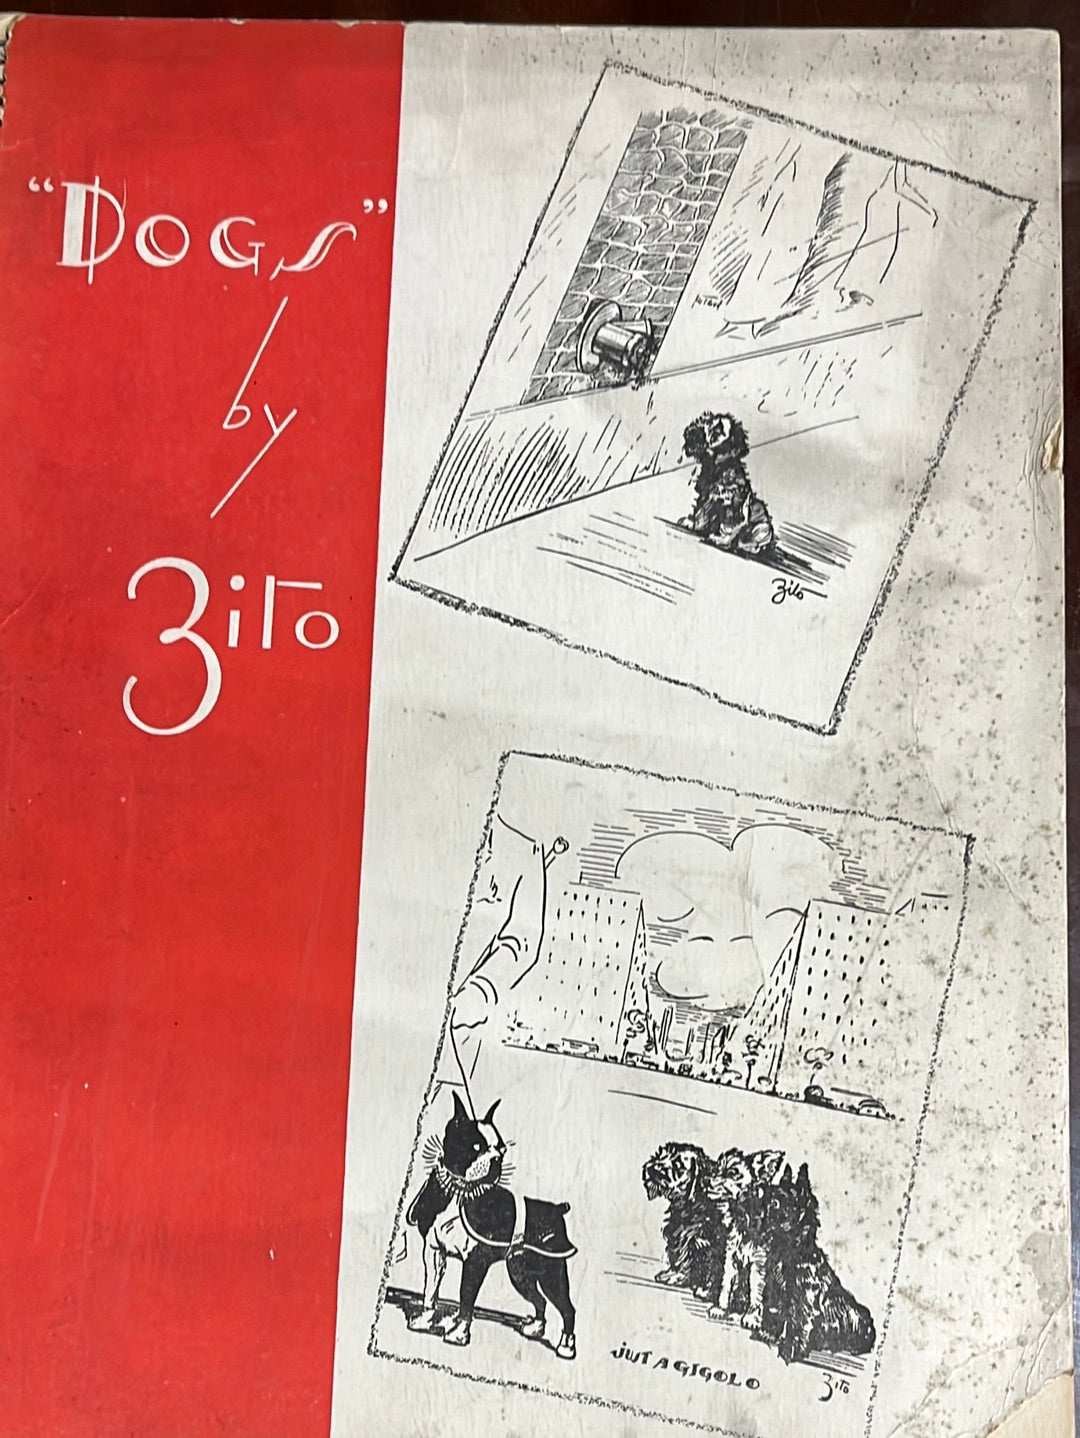 1937 Illustrated Dogs by Zito